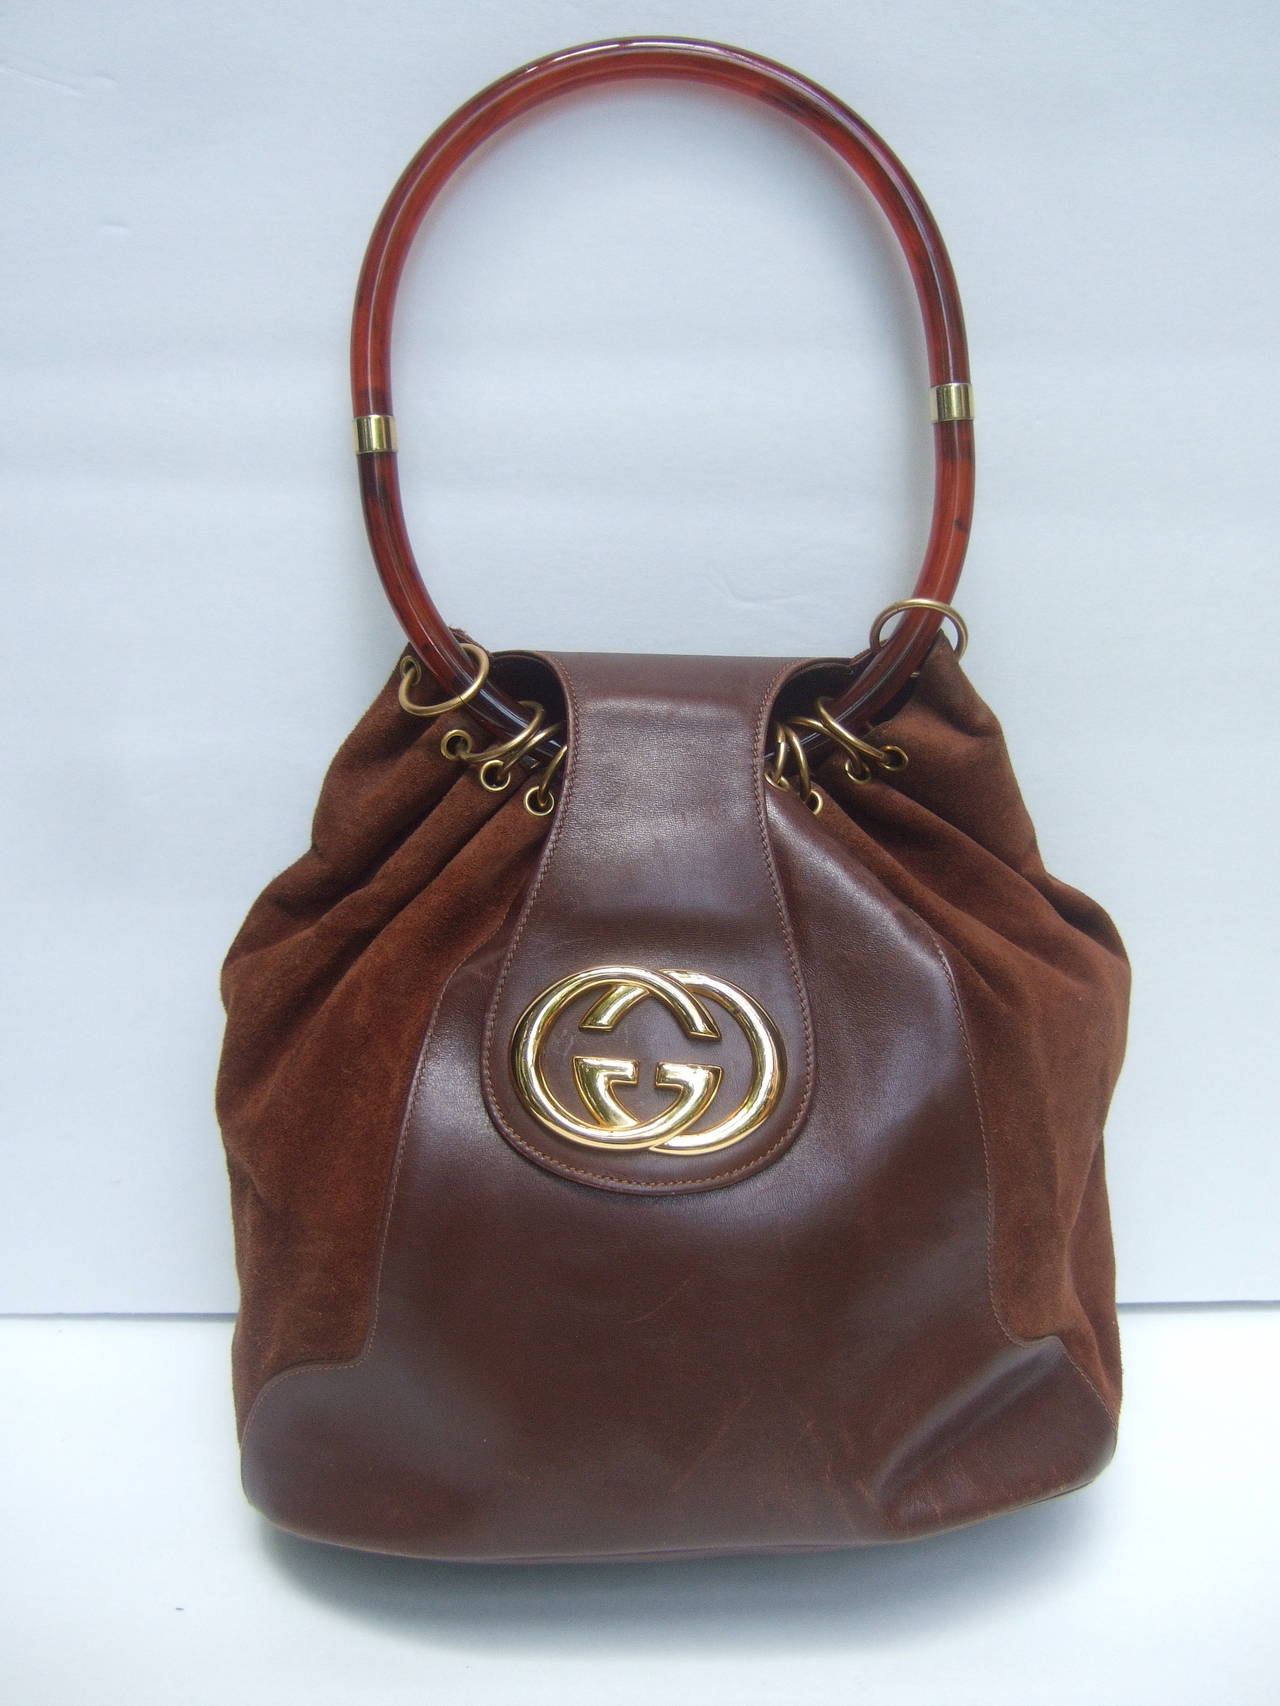 Gucci Italy Rare Brown Leather and Suede Handbag c 1970 at 1stdibs